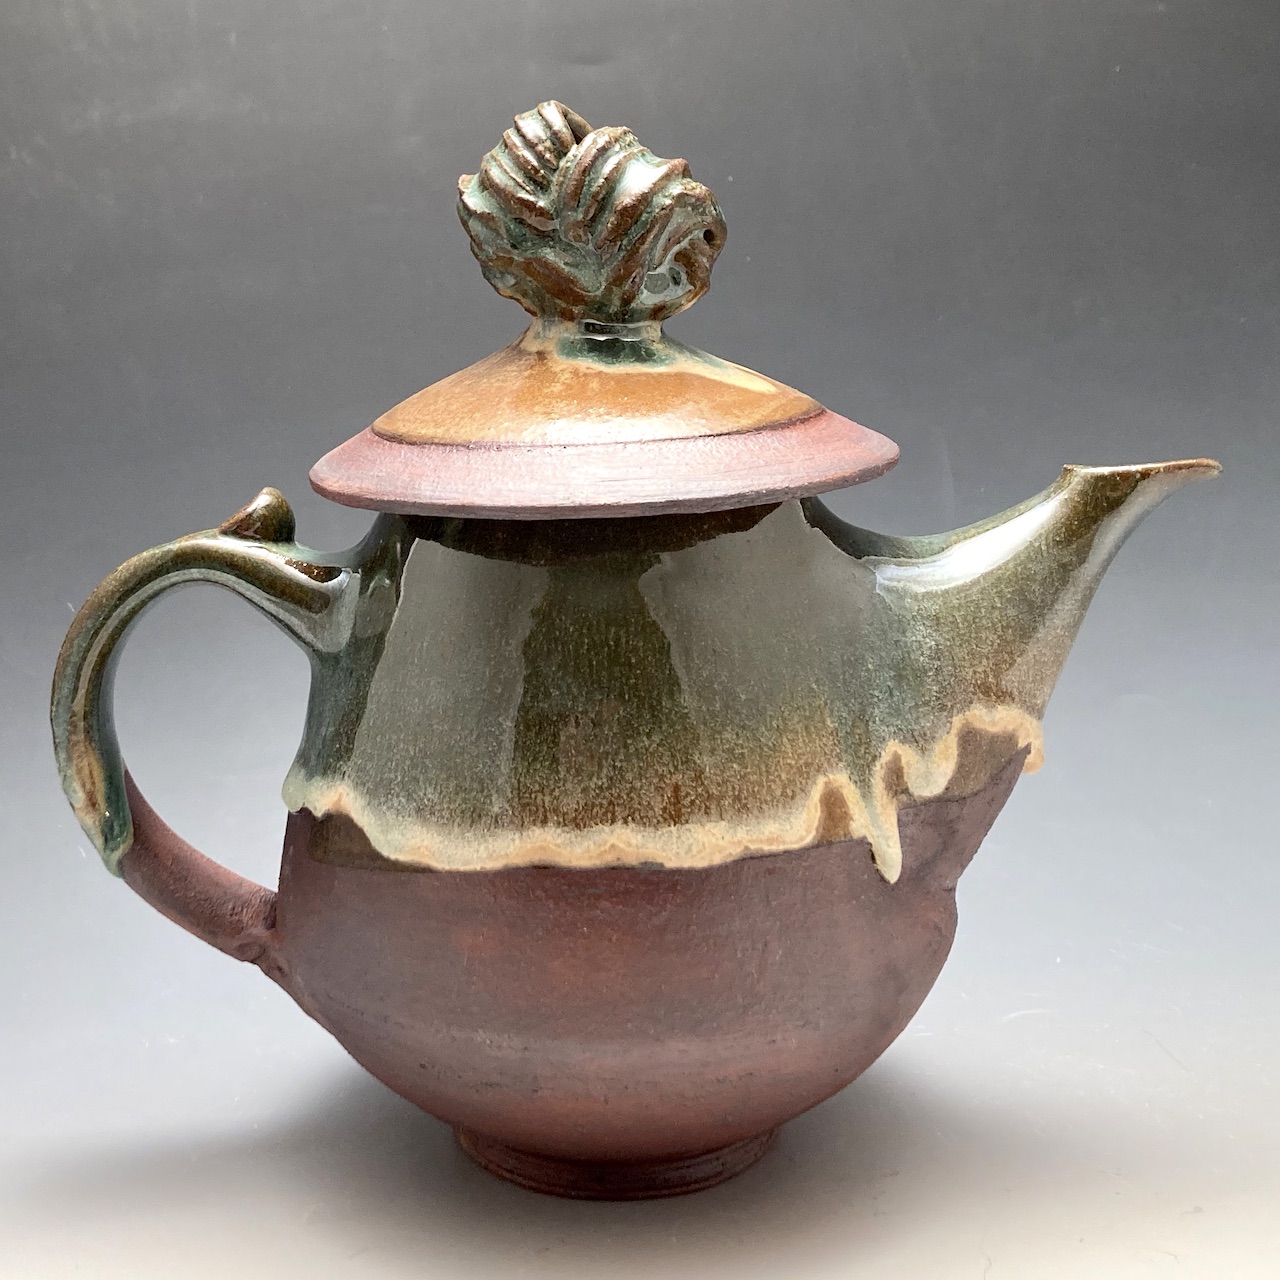 Handcrafted stone teapot with Juniper wood handle is like an artwork –  ECOIST